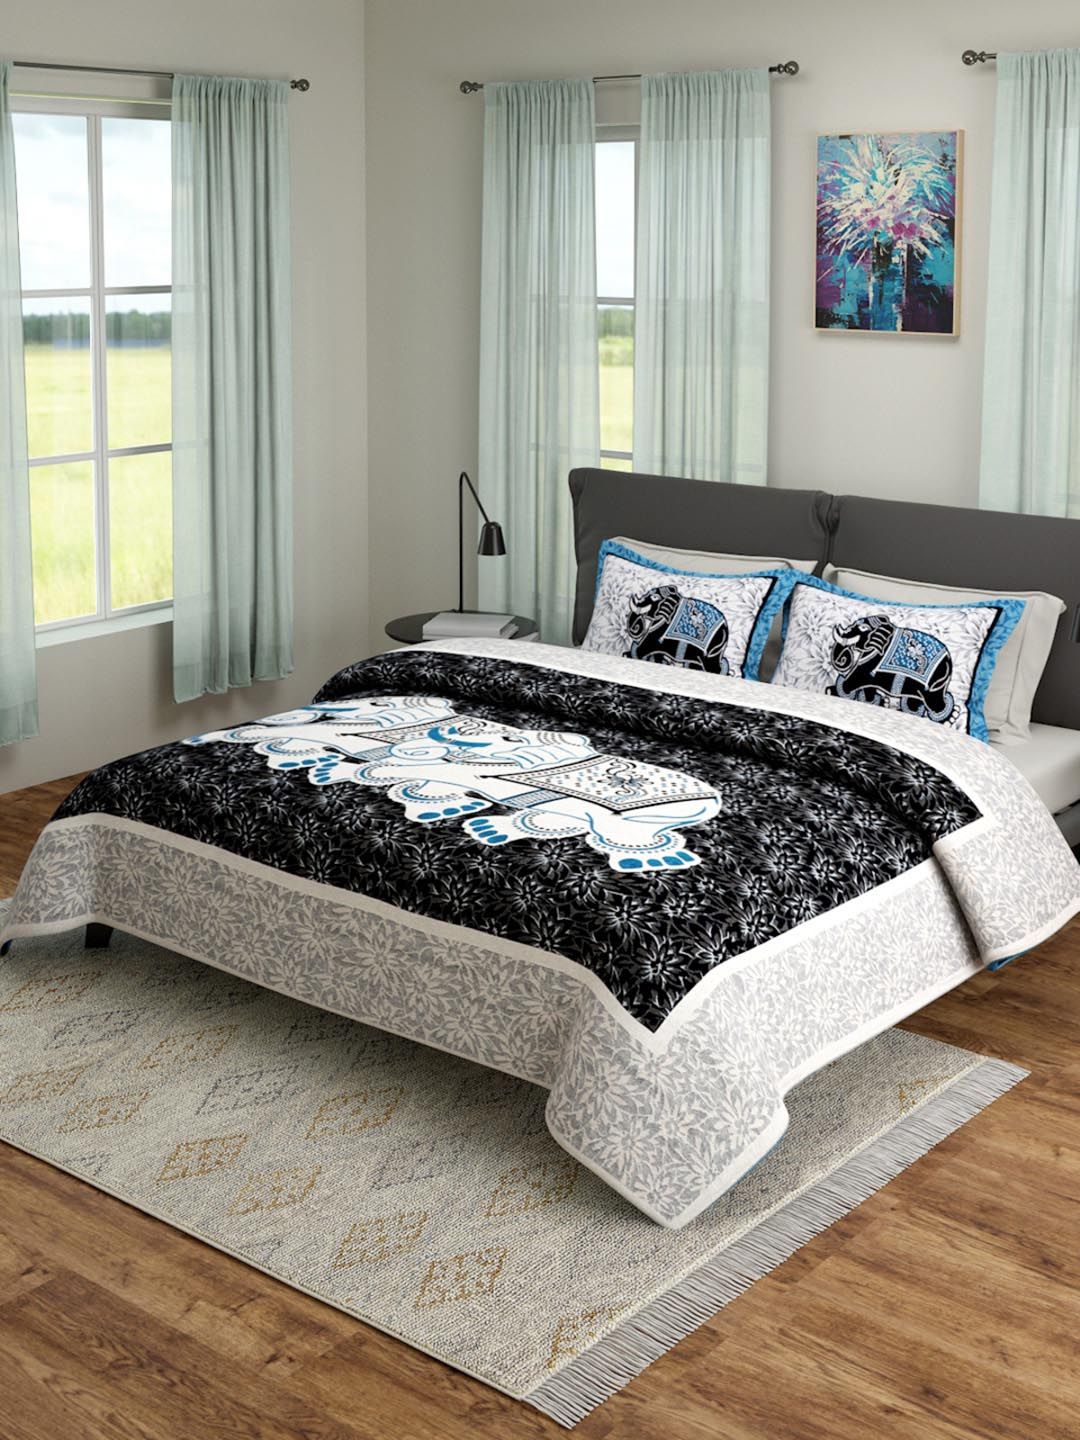 ROMEE Off-White & Turquoise Blue Queen Sized Printed 180TC Bed Cover With 2 Pillow Cases Price in India